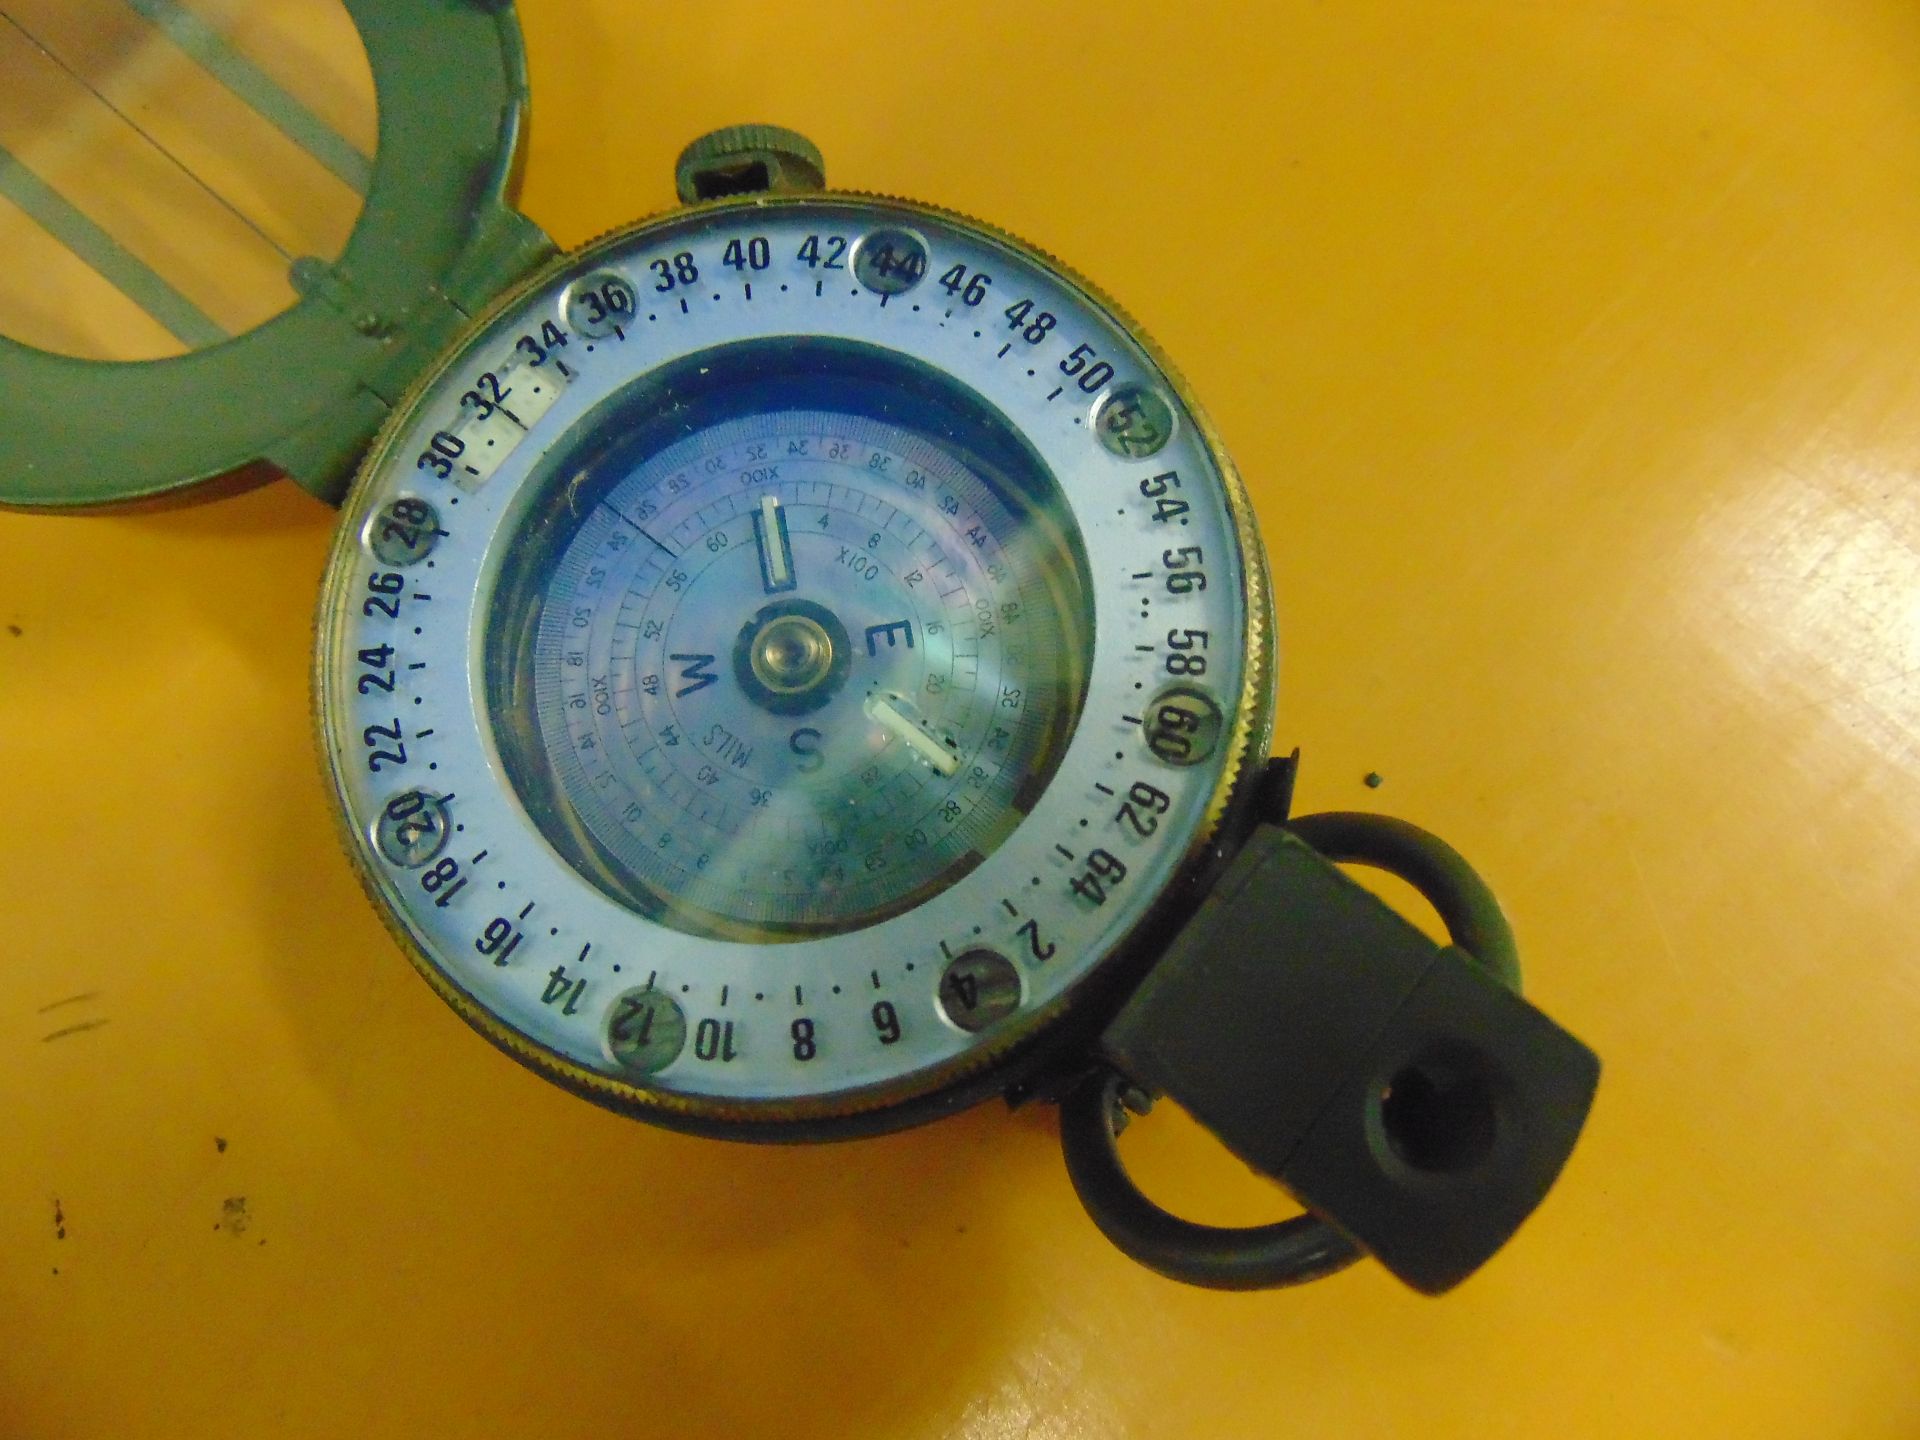 Genuine British Army Stanley Prismatic Marching Compass complete with webbing pouch - Image 3 of 6